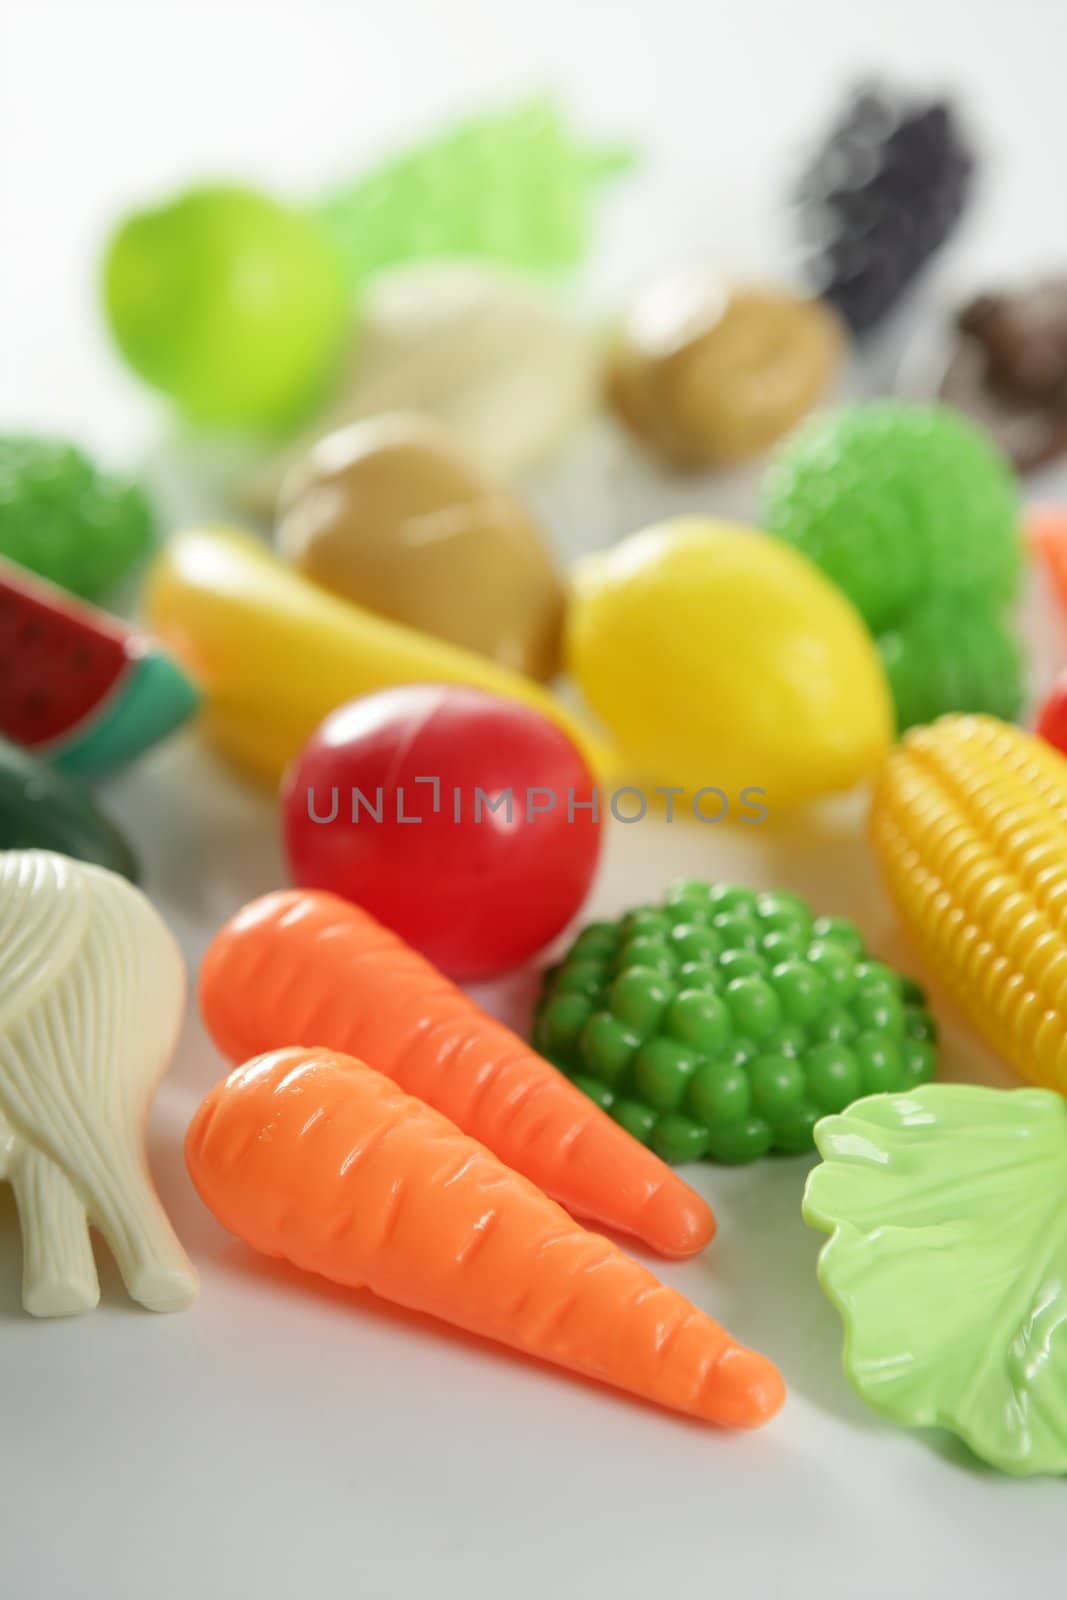 Plastic game, fake varied vegetables and fruits by lunamarina